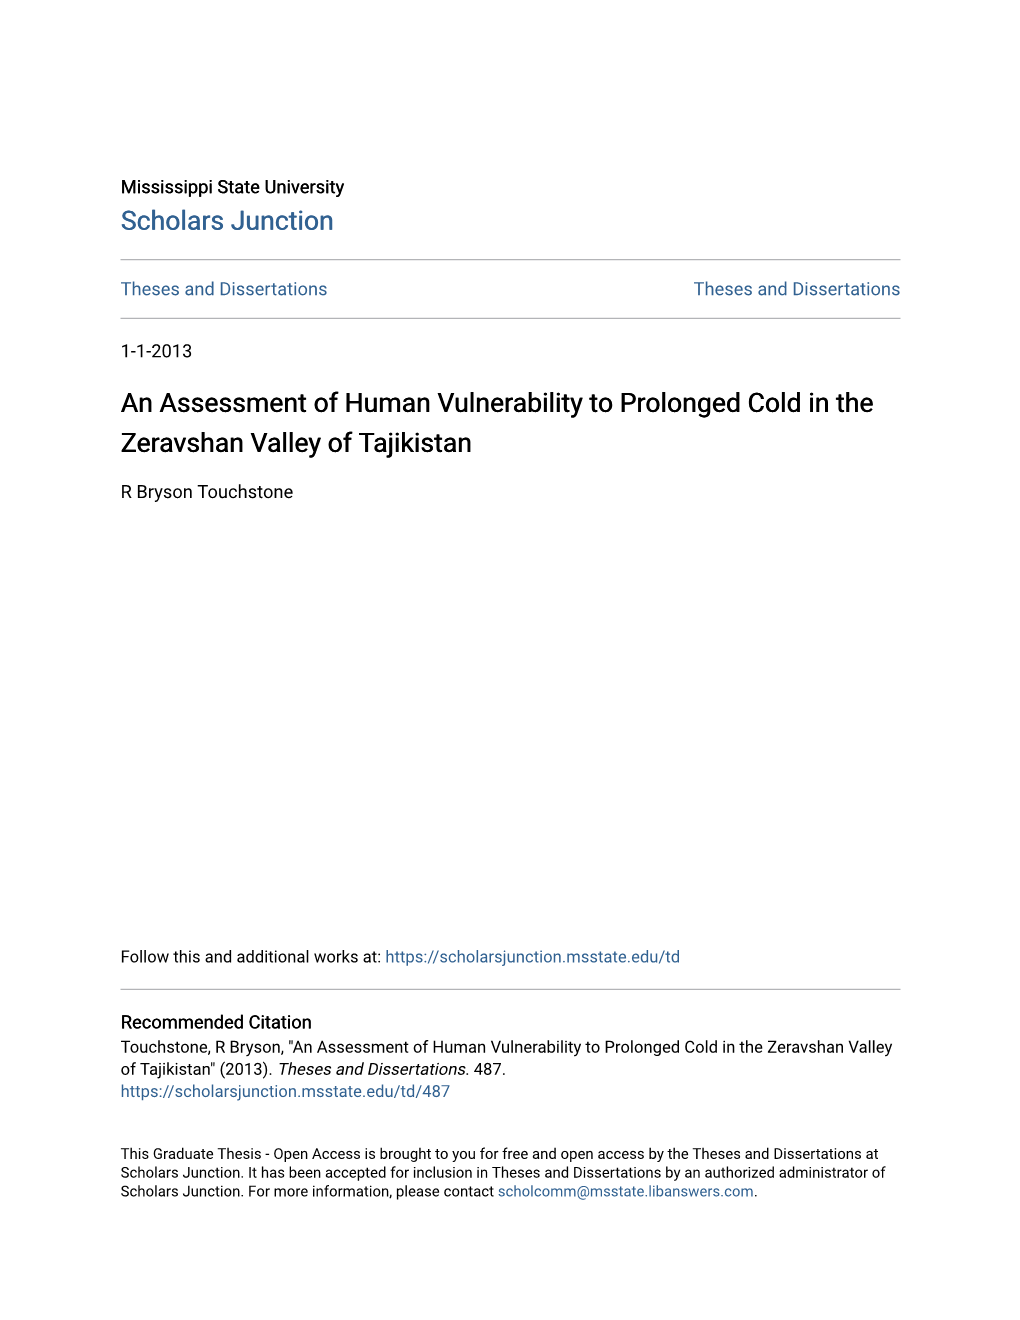 An Assessment of Human Vulnerability to Prolonged Cold in the Zeravshan Valley of Tajikistan